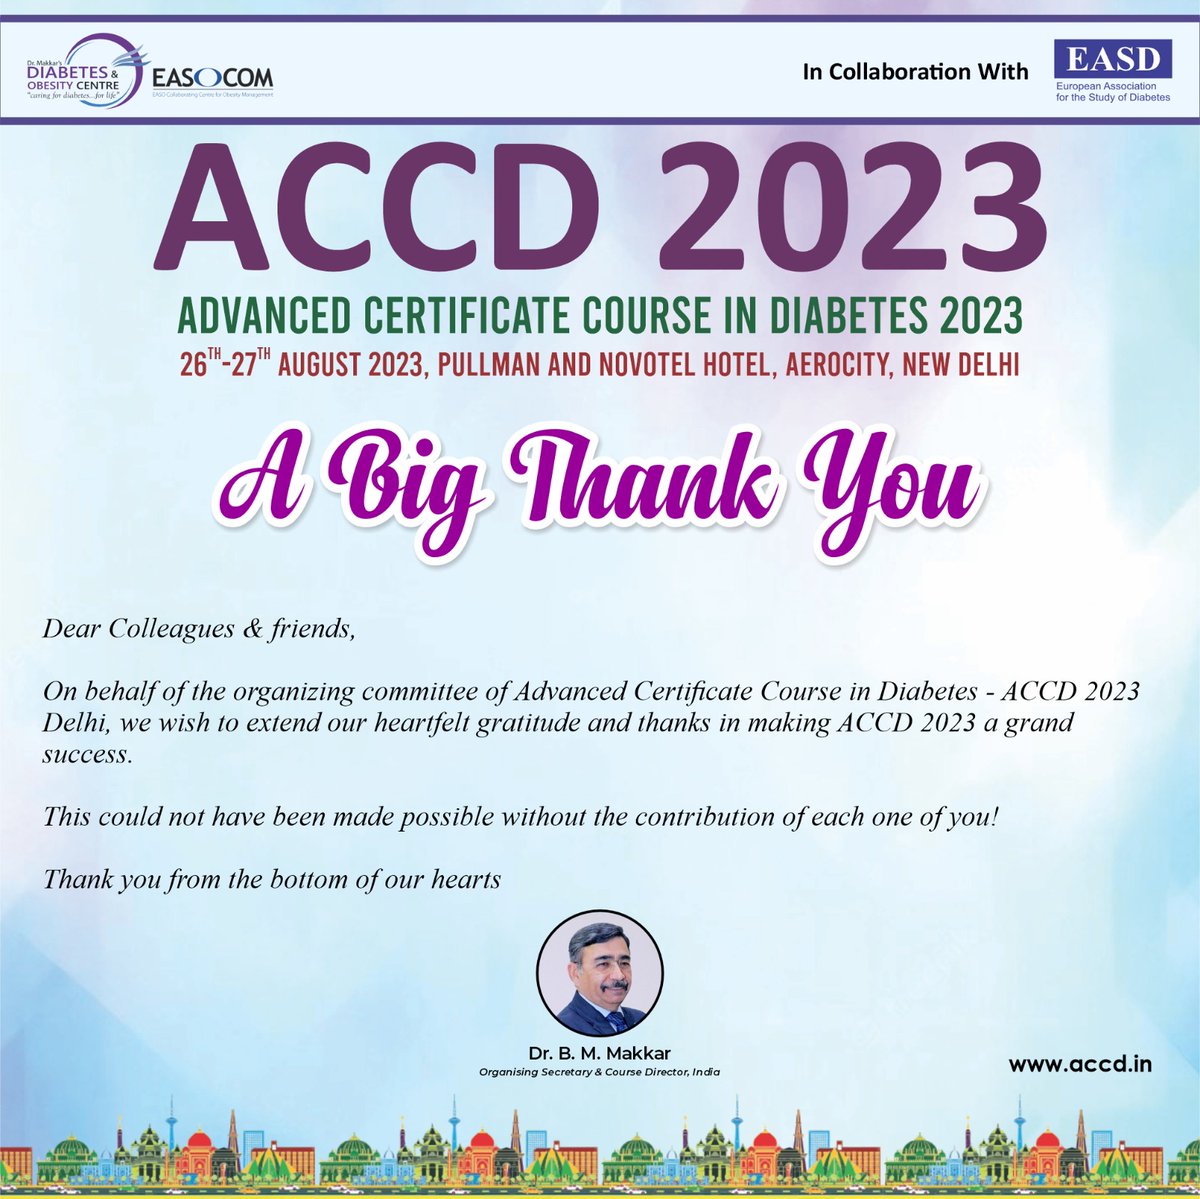 On behalf of the organizing committee of Advanced Certificate Course in Diabetes - ACCD 2023 Delhi, we wish to extend our heartfelt gratitude and thanks in making ACCD 2023 a grand success.